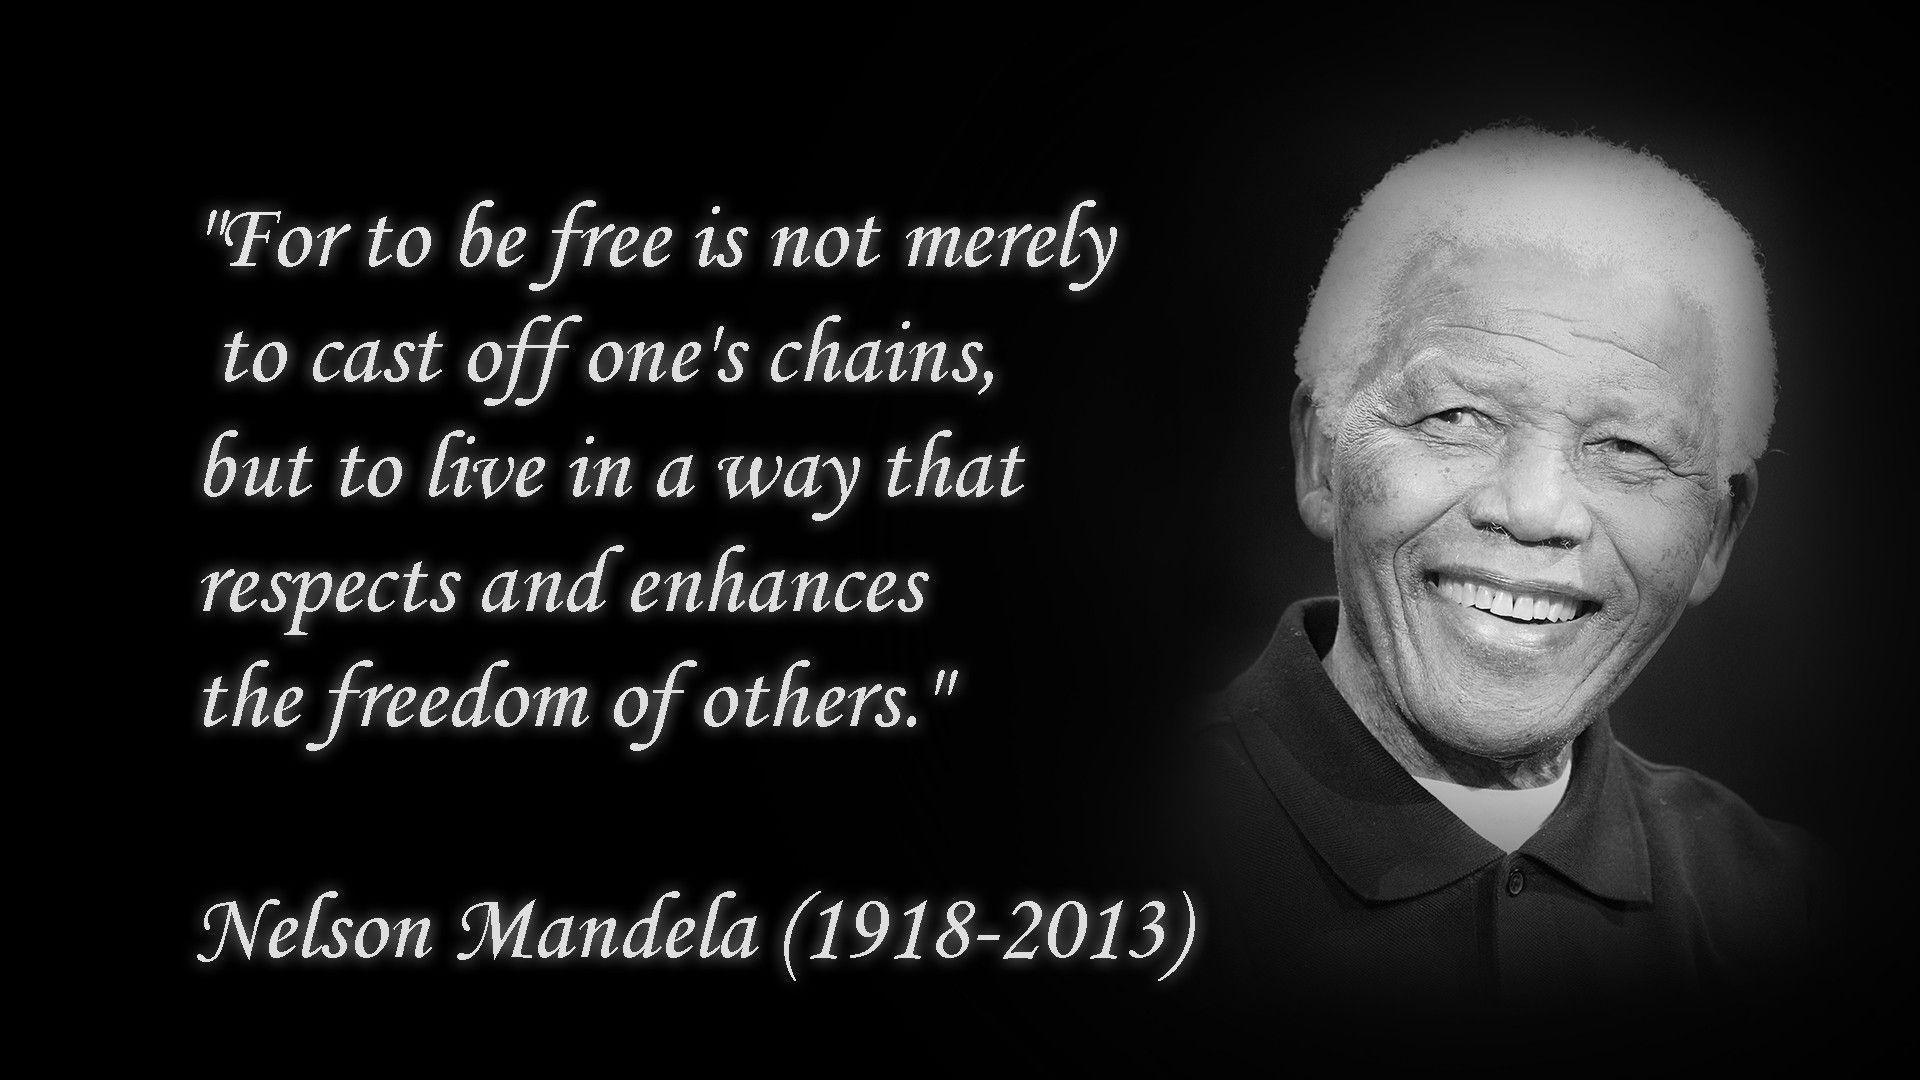 Nelson Mandela Quote High Quality Wallpaper